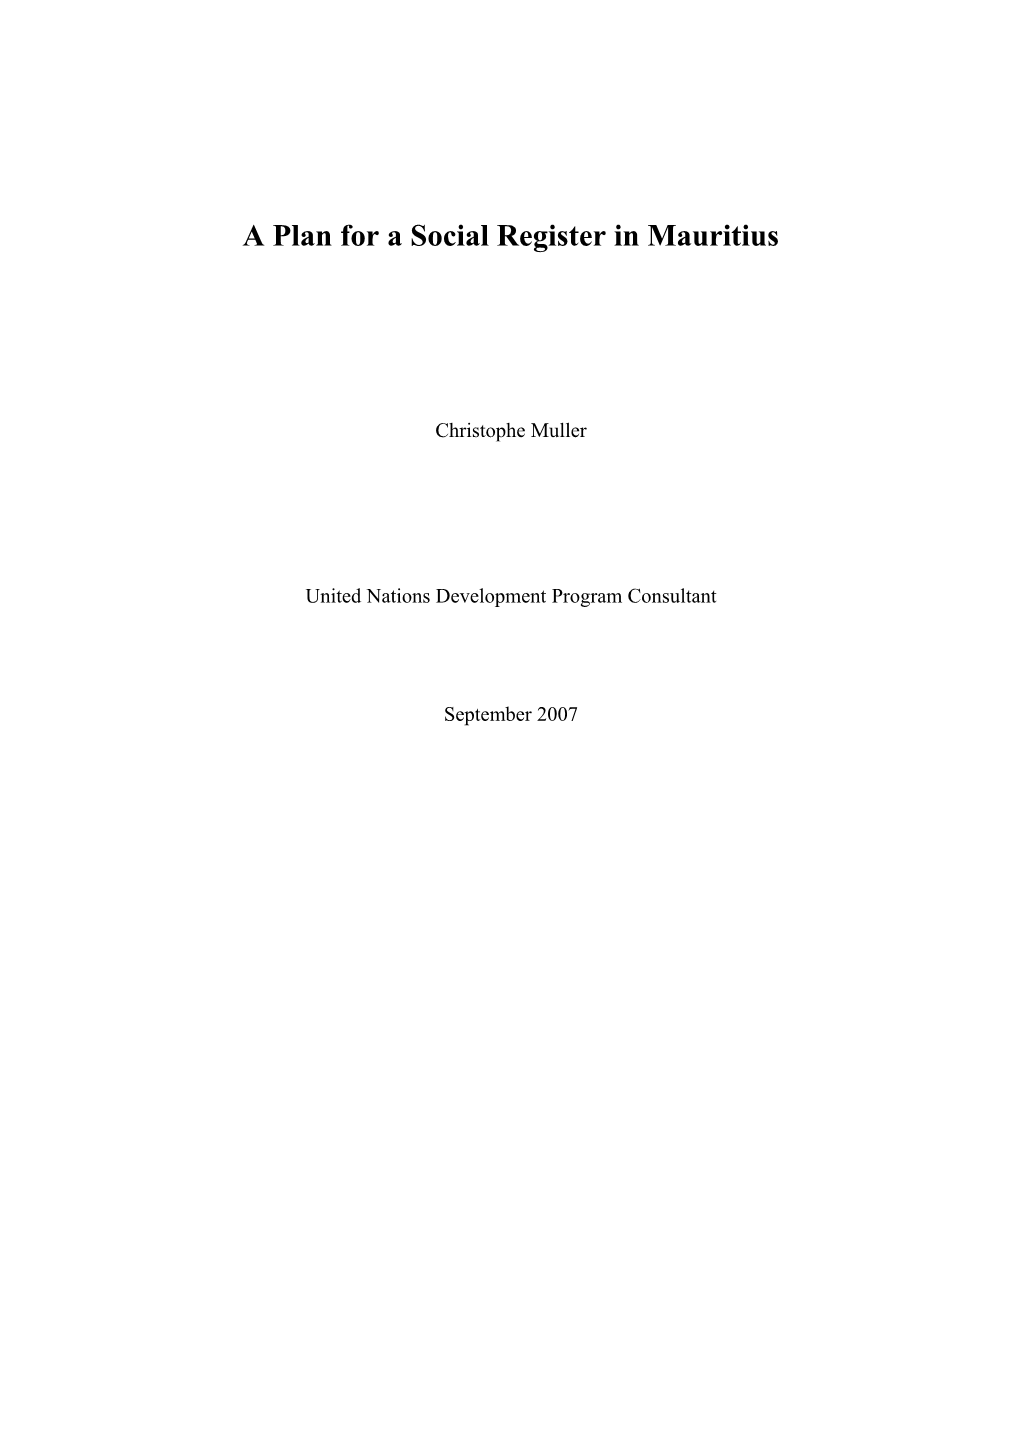 A Plan for a Social Register in Mauritius